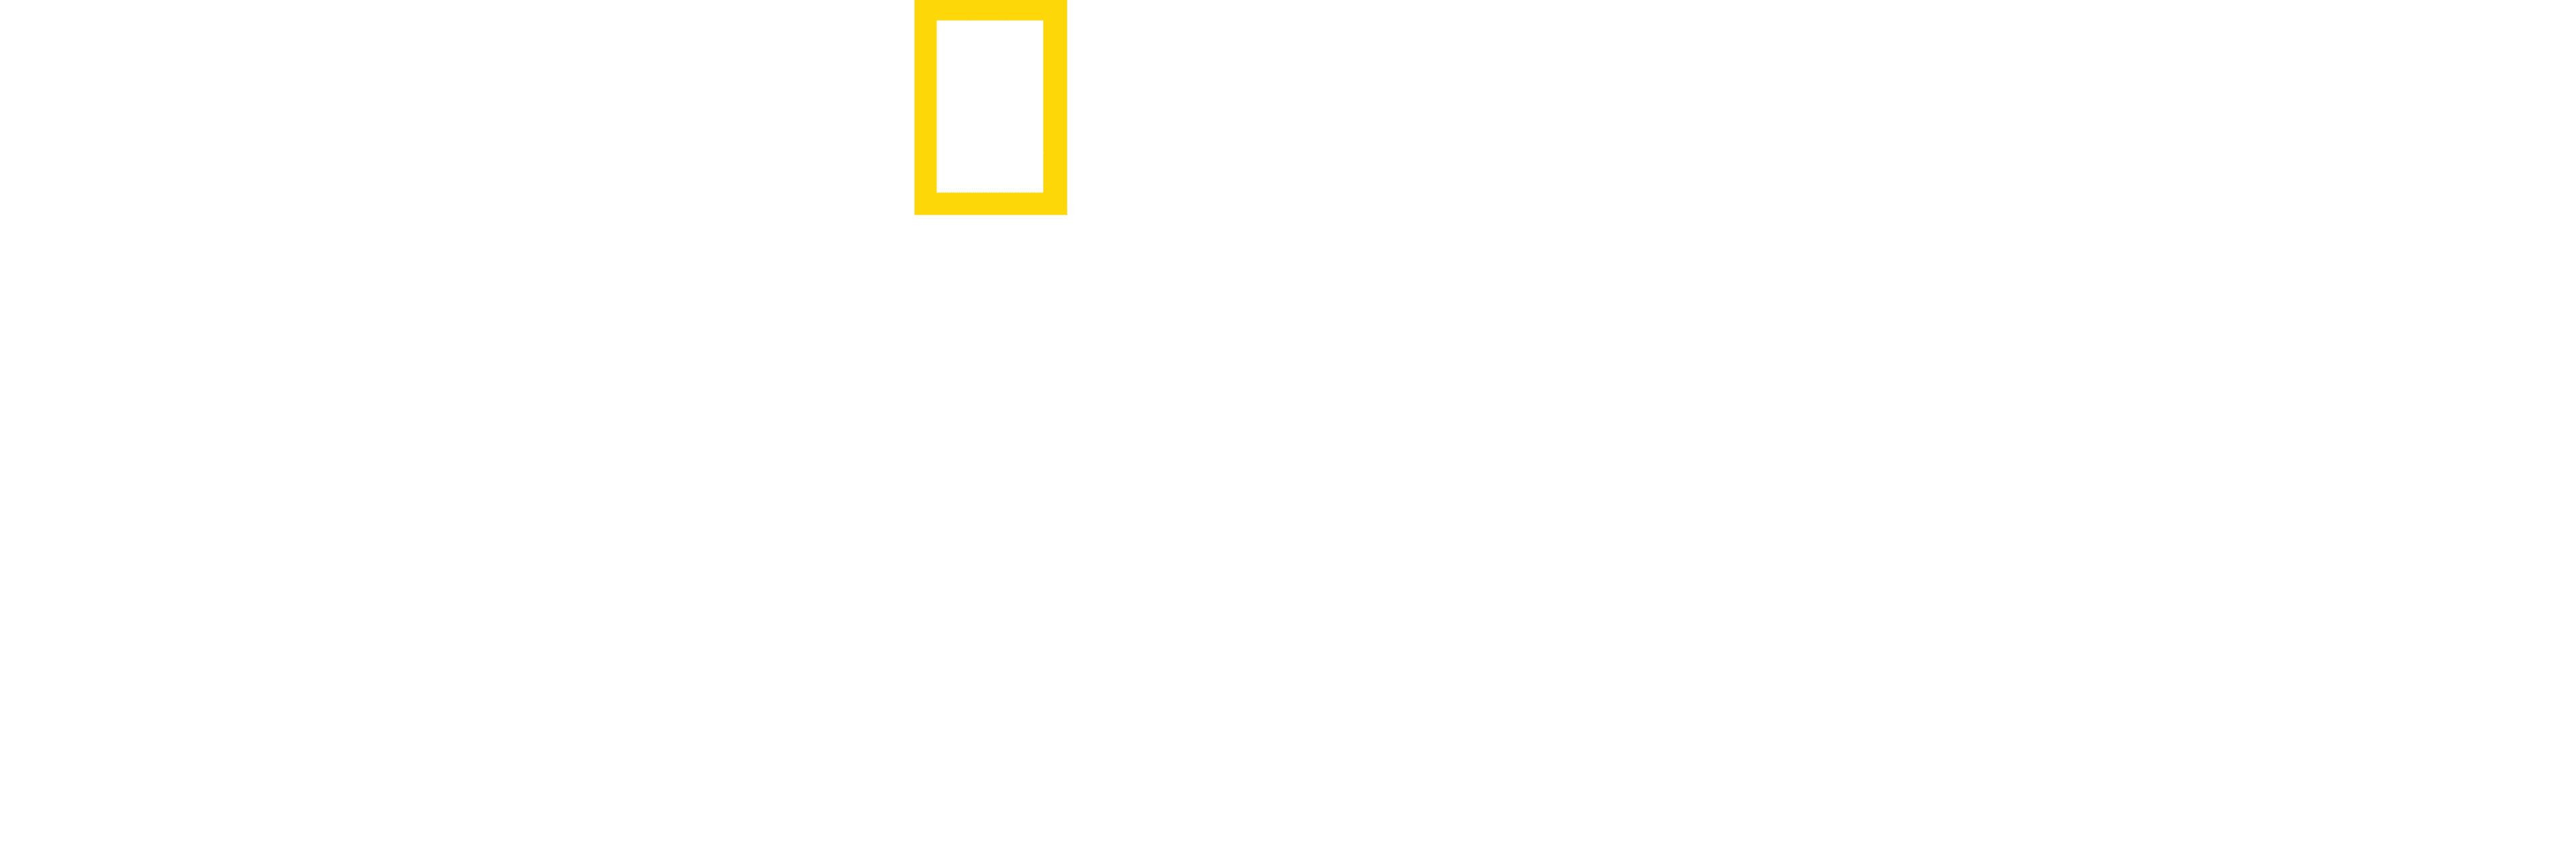 Latin America from Above logo